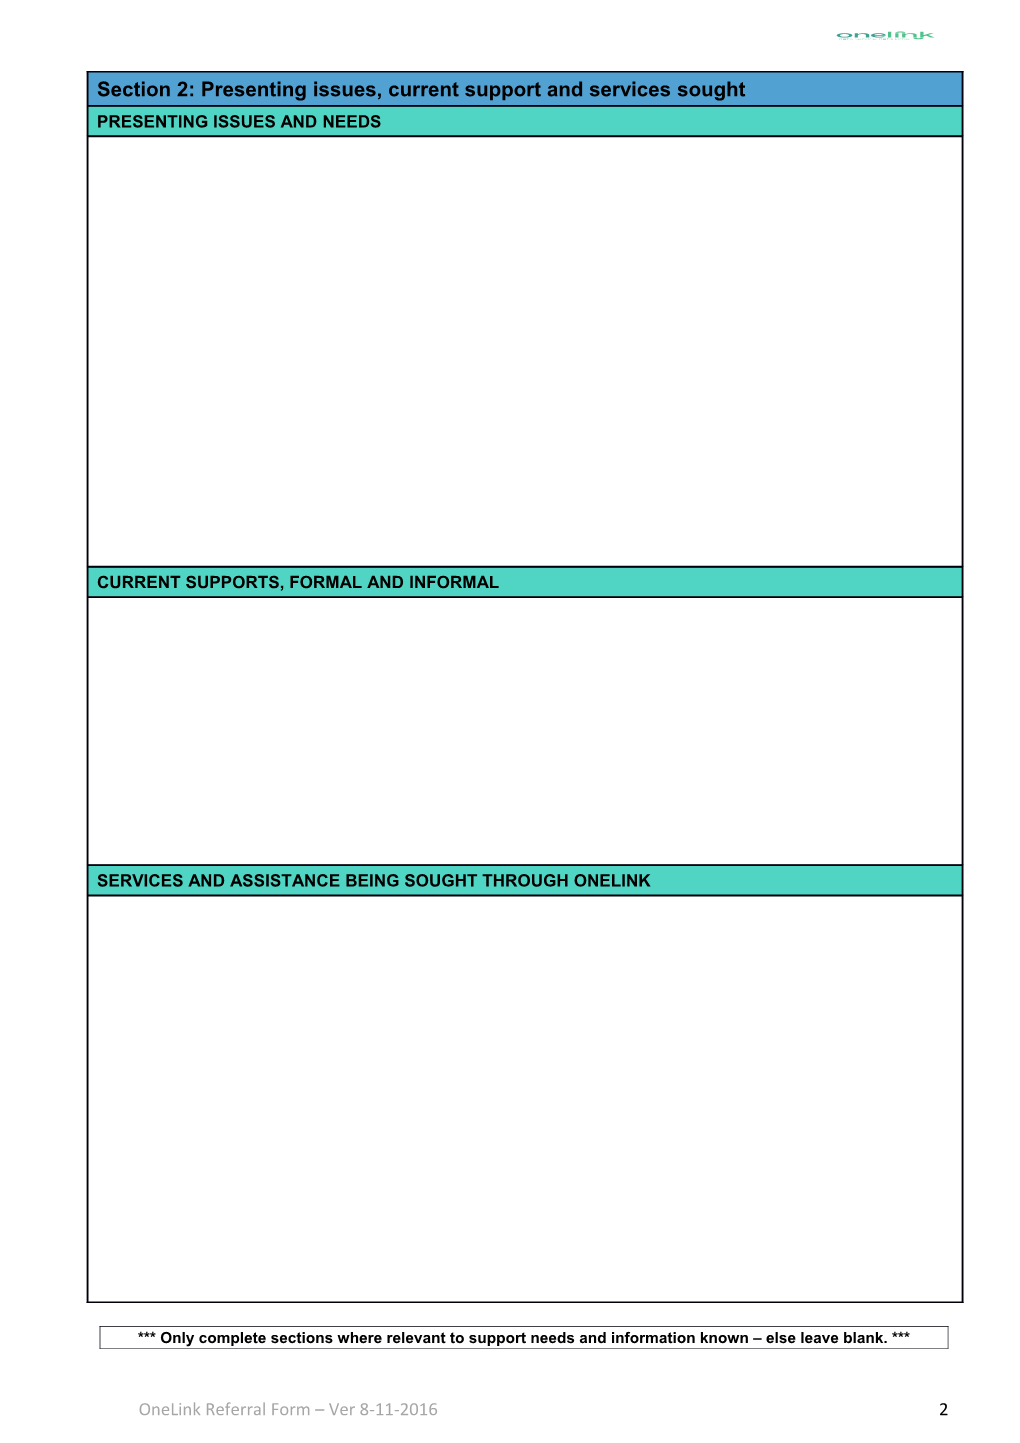 Only Complete Sections Where Relevant to Support Needs and Information Known Else Leave Blank